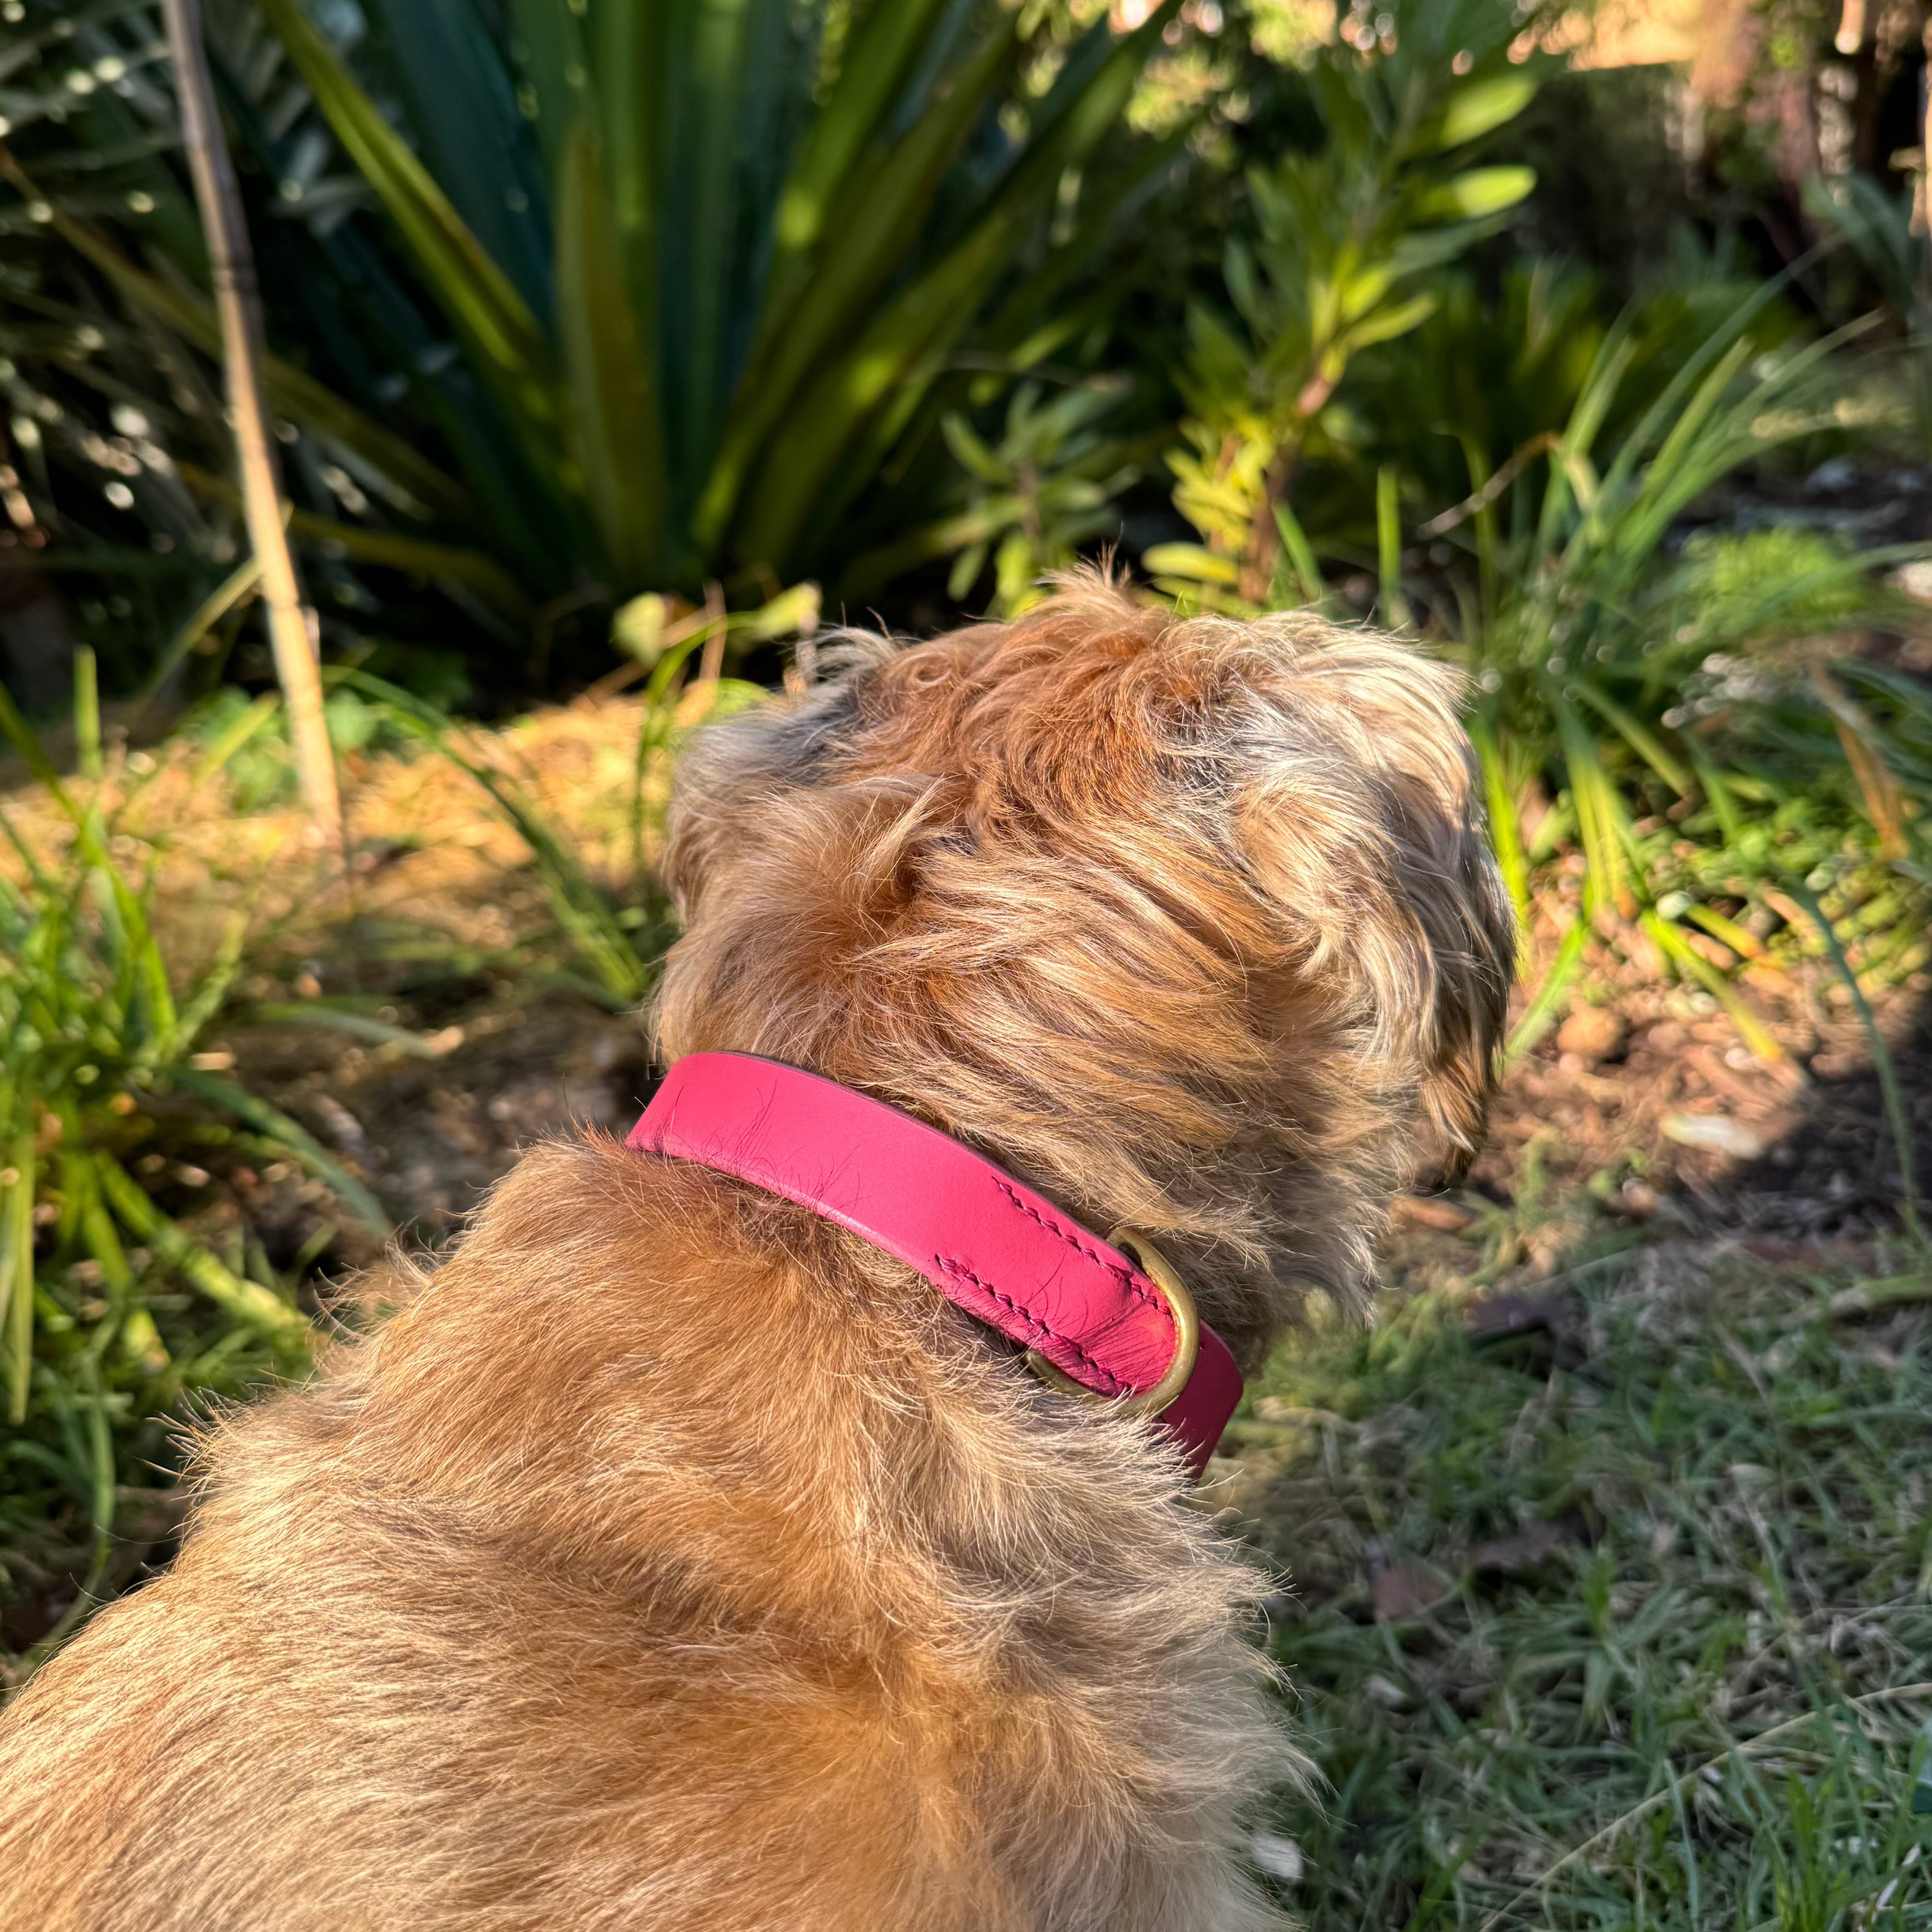 A small dog with light brown, curly fur is sitting on a grassy area, facing away from the camera. The dog is wearing a bright Georgie Paws Bald Collar Hot Pink. In the background, there are large green plants and trees, and the scene is bathed in natural sunlight, indicating it's a sunny day.